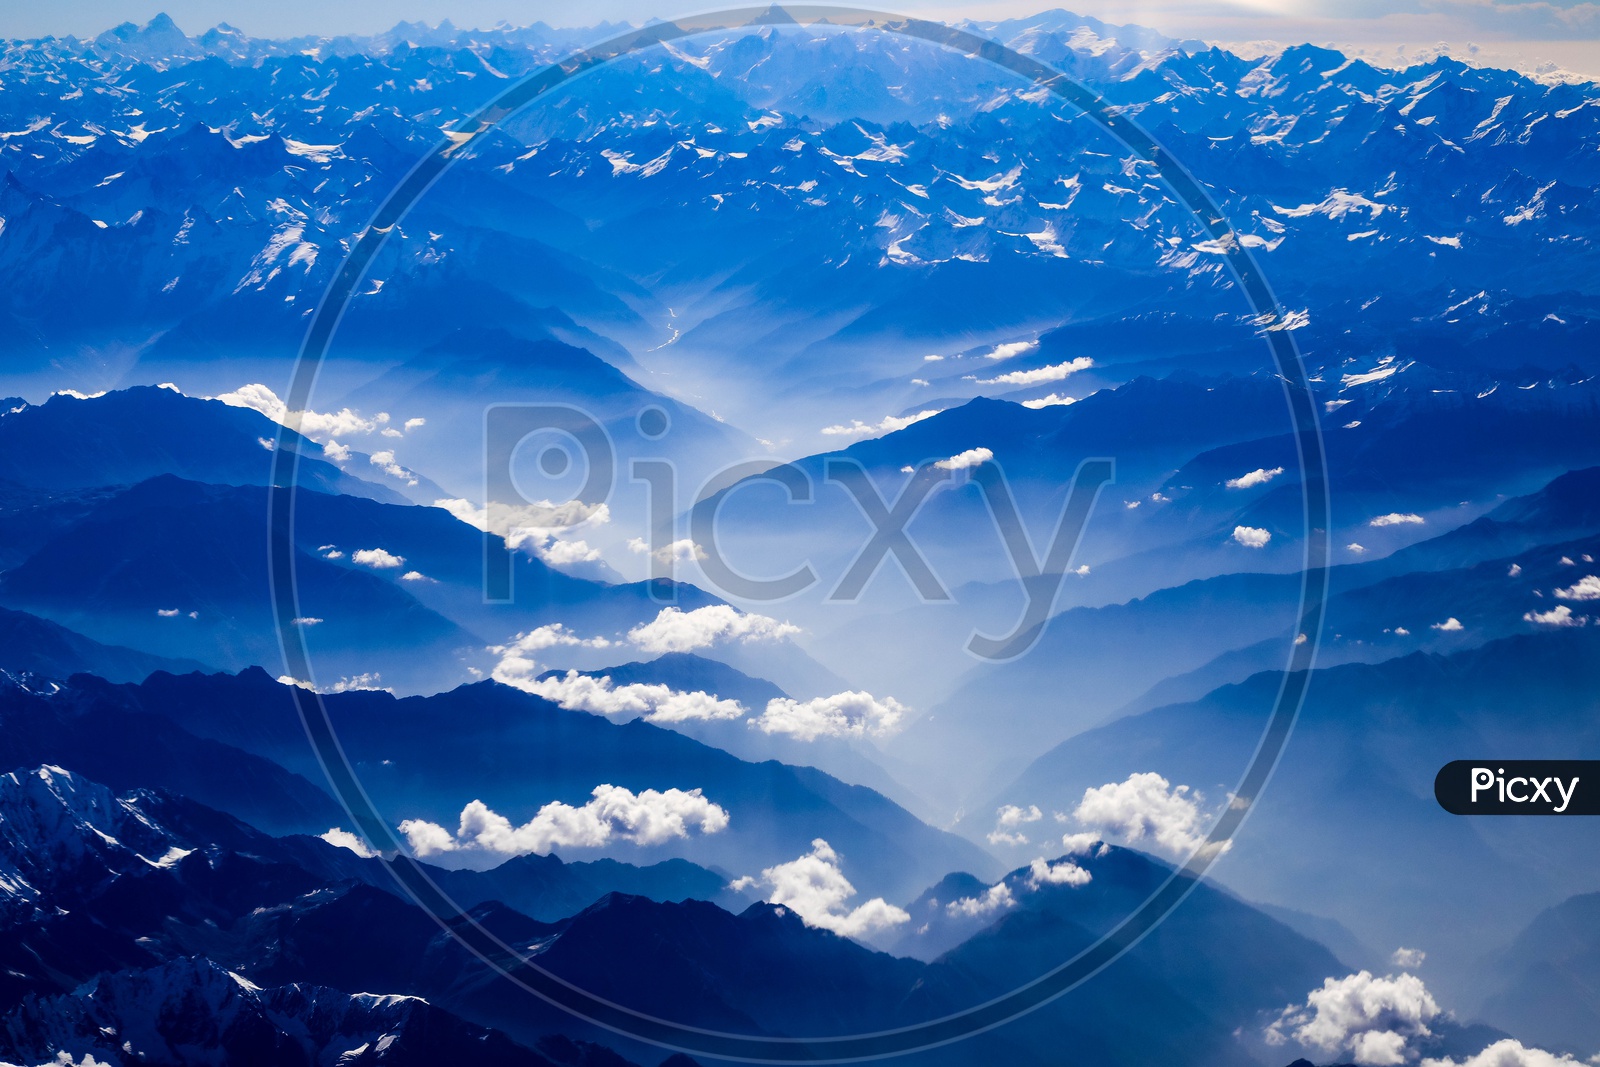 Layer like structure formation of Hills and Mountains of Himalayas with clouds above them